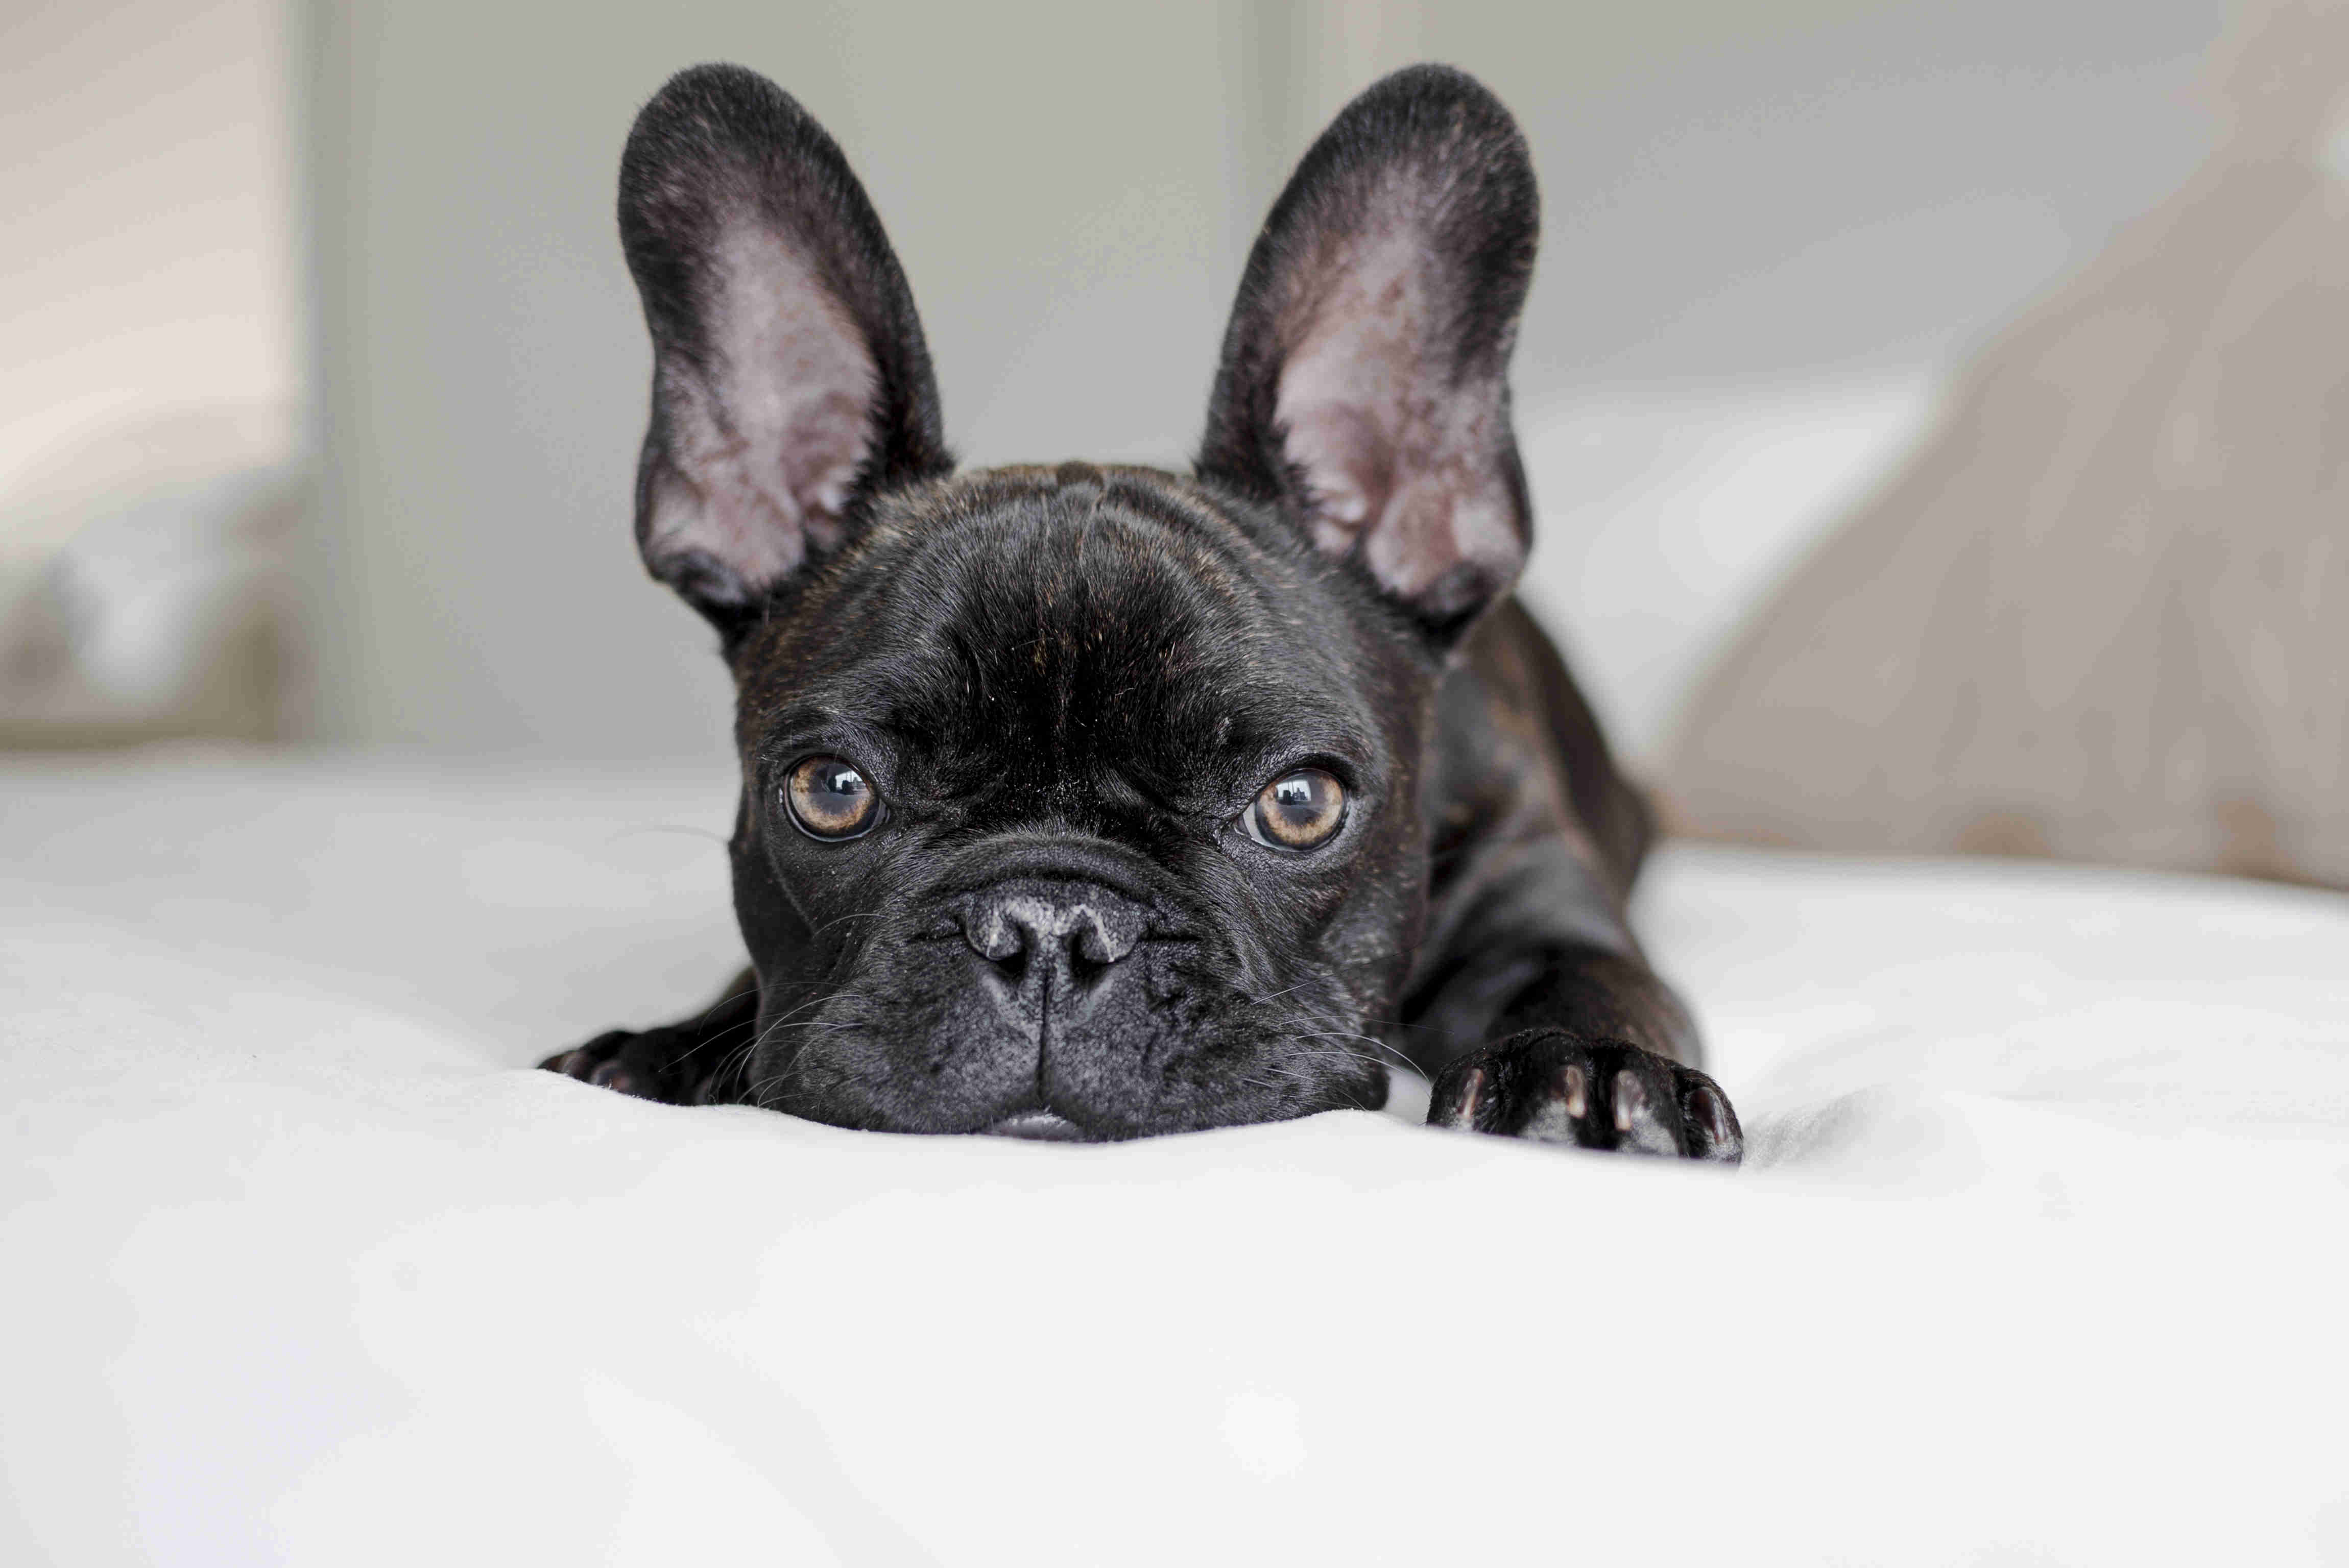 5 Effective Ways to Help Your French Bulldog Overcome Fear of Loud Noises - Fireworks, Construction, and More